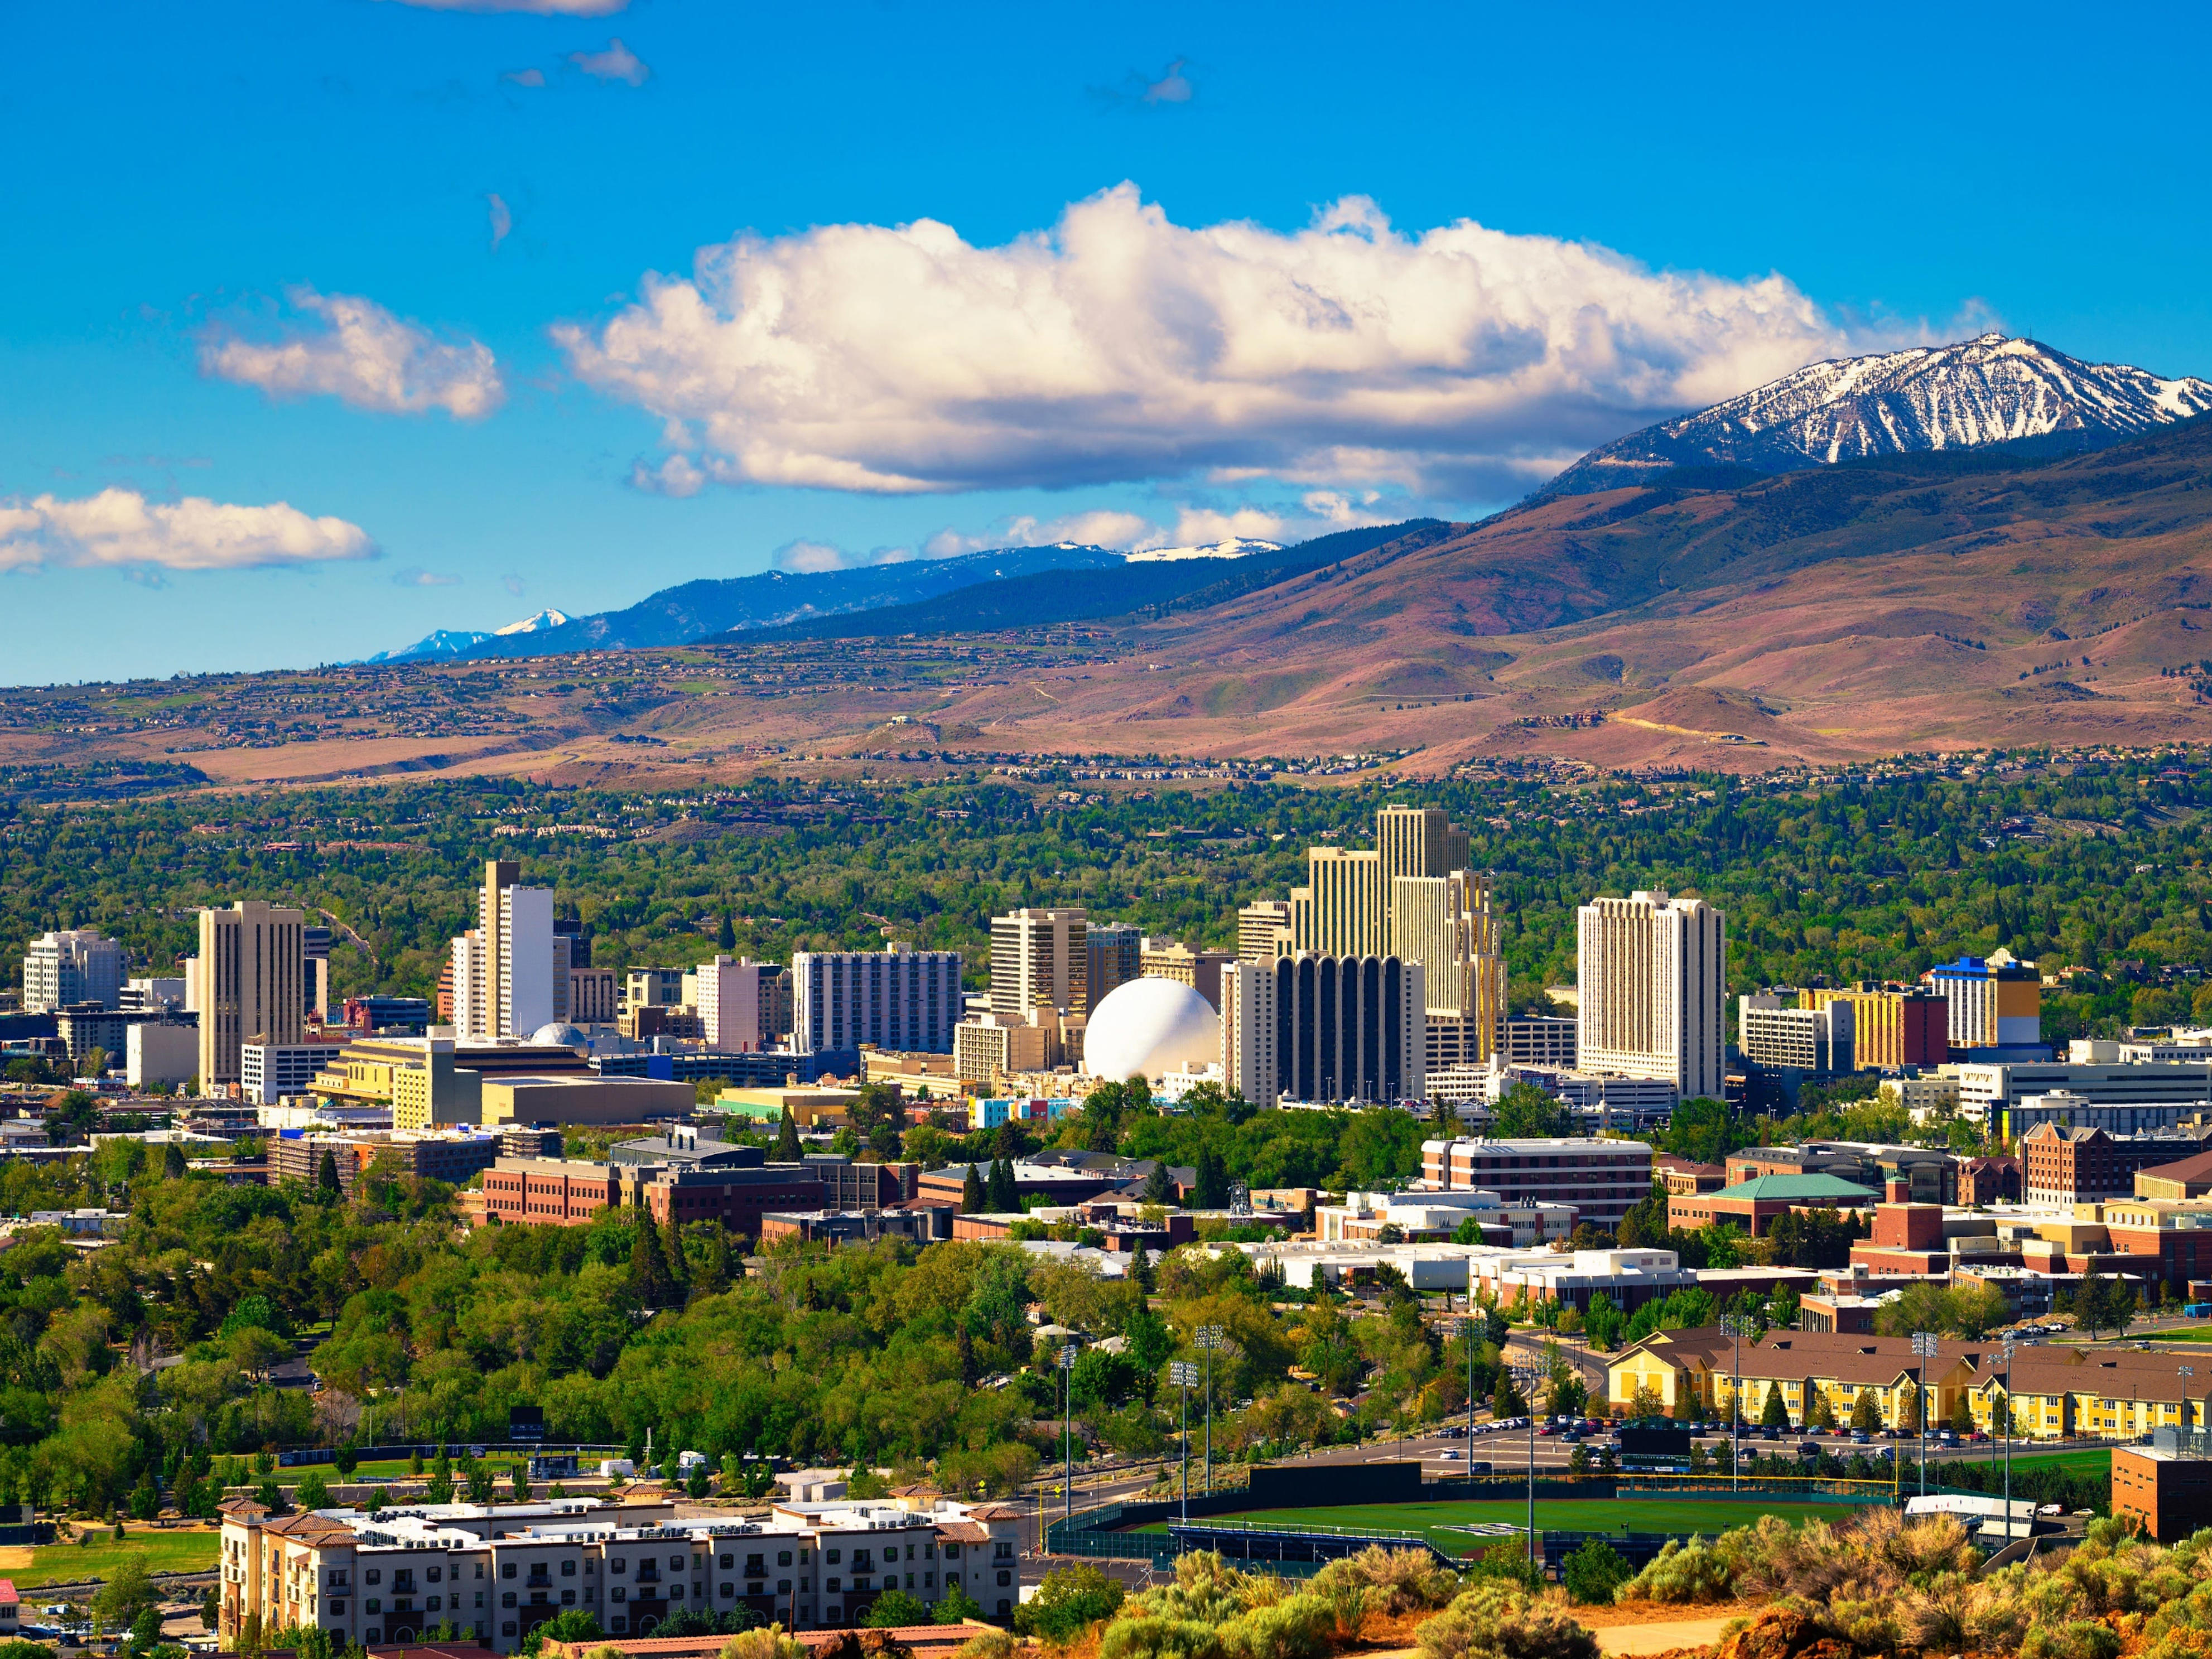 <p>Nevada came in No. 4 for the least-safe state in financial safety. It was also ranked the fifth worst state for personal and residential safety and the eighth worst in WalletHub's metric for road safety. It also has the third-highest unemployment rate.</p>